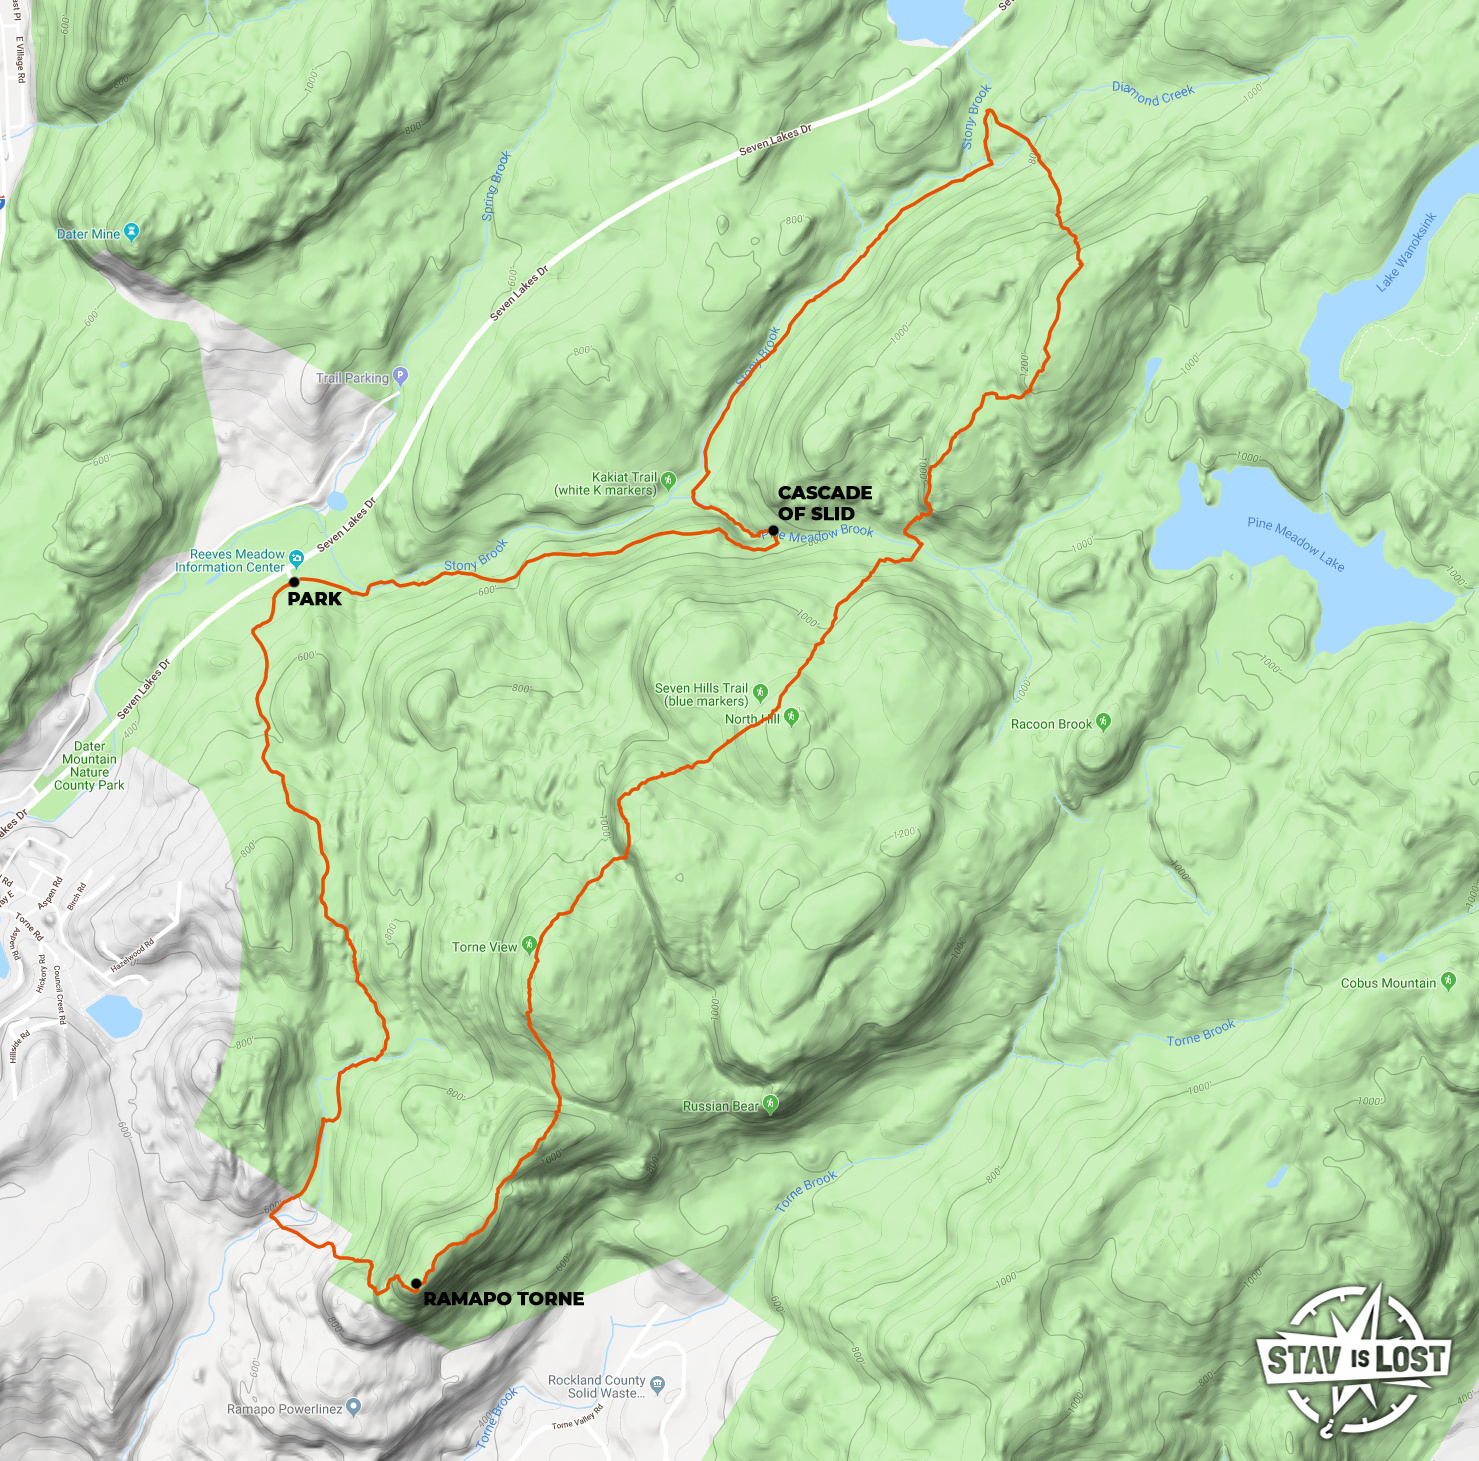 map for Seven Hills, Stony Brook, Cascade of Slid Loop by stav is lost